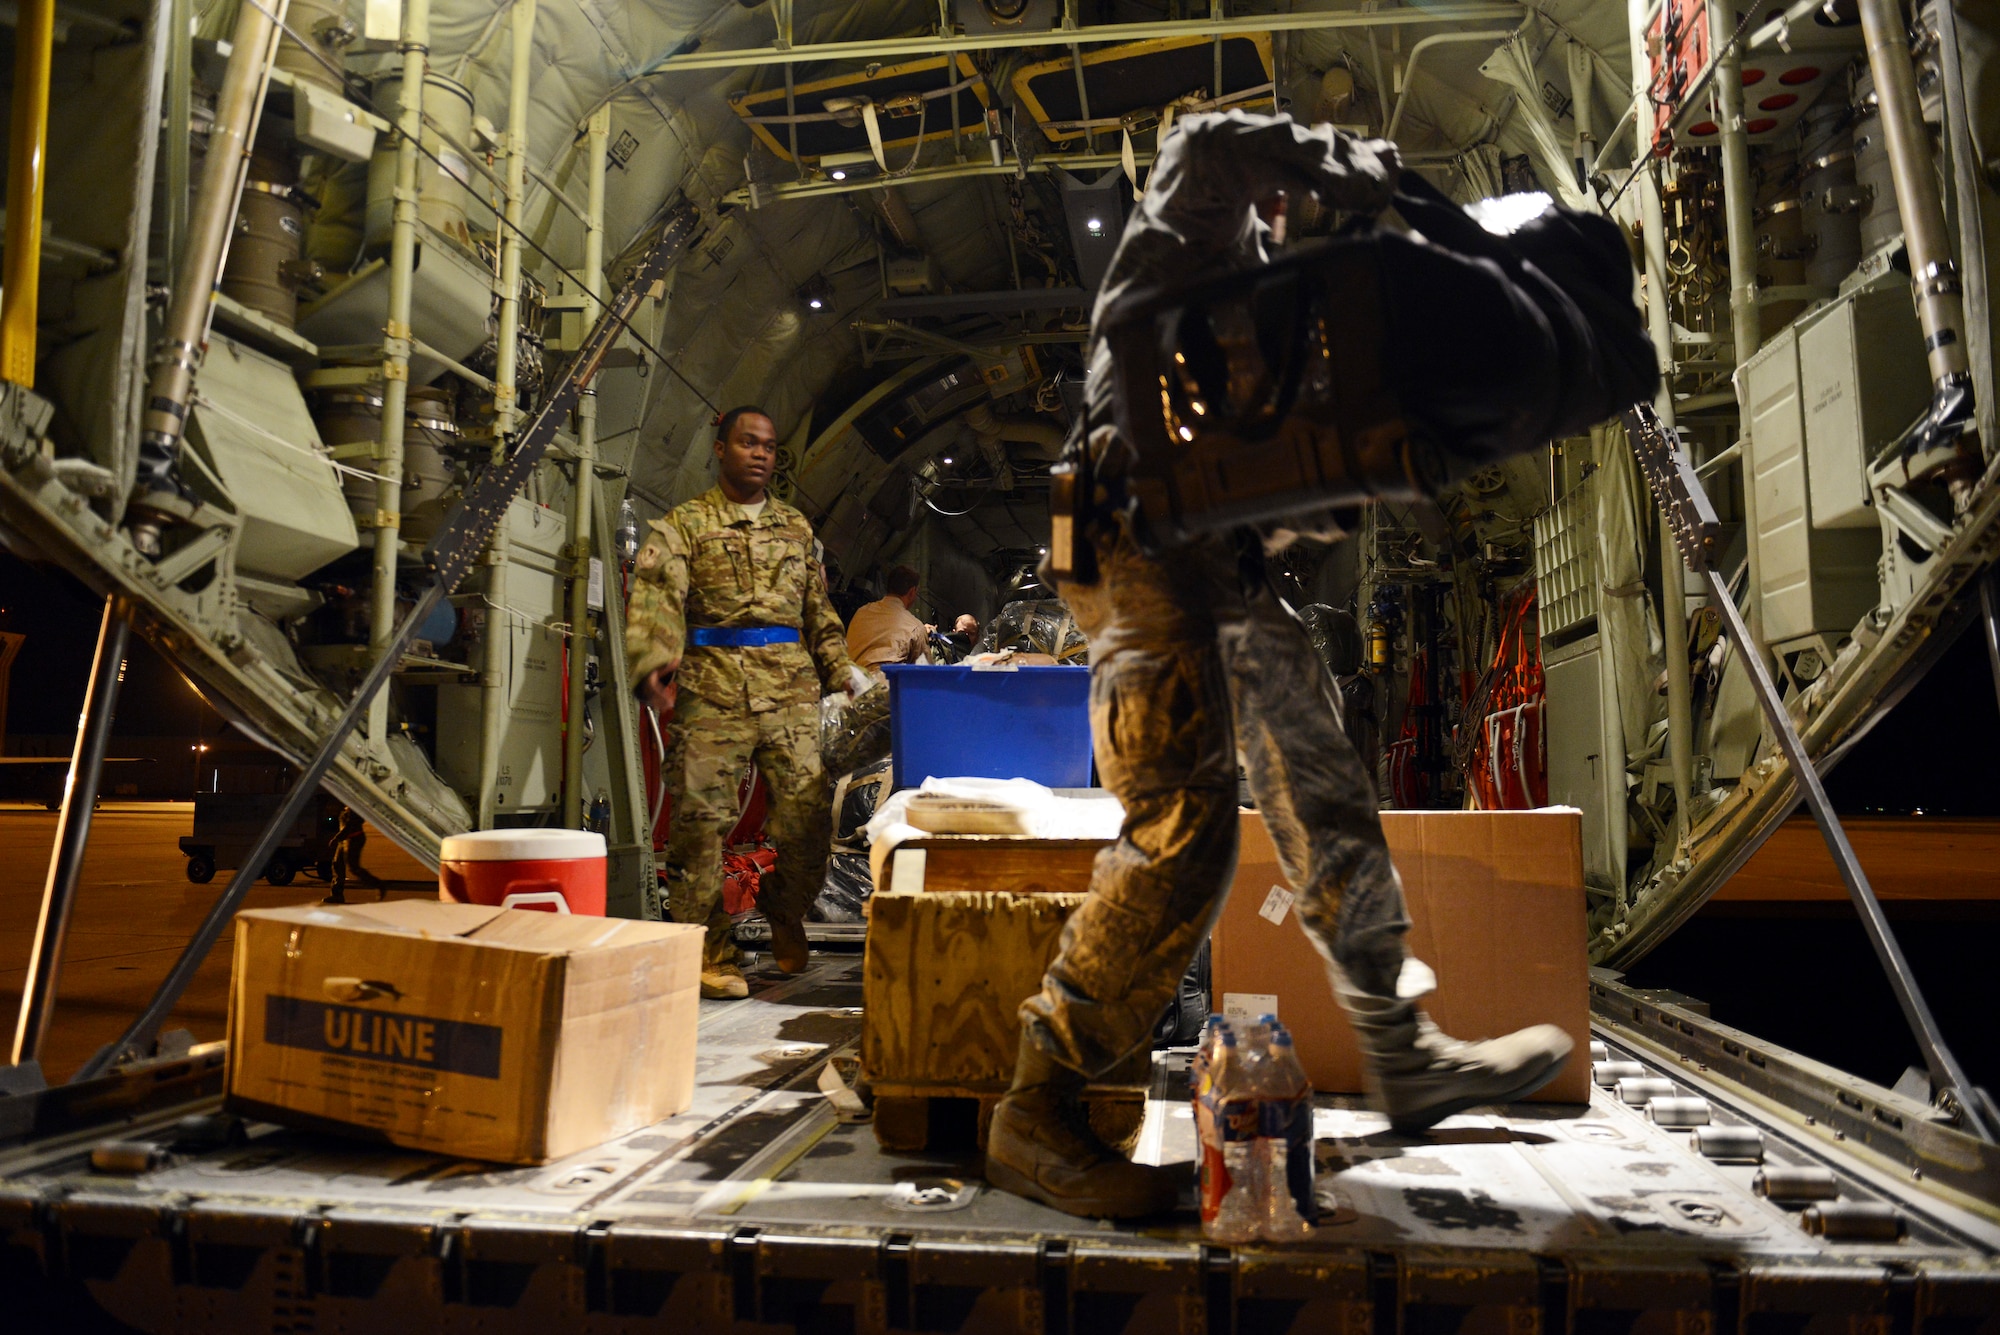 U.S. Airmen load luggage and supplies aboard a C-130J Super Hercules before deploying from Dyess Air Force Base, Texas, Oct. 29, 2014, in support of Operation United Assistance. The deployment, which is expected to last approximately 120 days, will not require Dyess Airmen to treat or transport persons stricken with the Ebola virus, or healthcare workers who have had direct contact with Ebola patients. Instead, the mission requirements focus on moving cargo and needed supplies to support U.S. interagency partners in their collective response to the outbreak in West Africa. (U.S. Air Force photo by Airman 1st Class Kedesha Pennant)